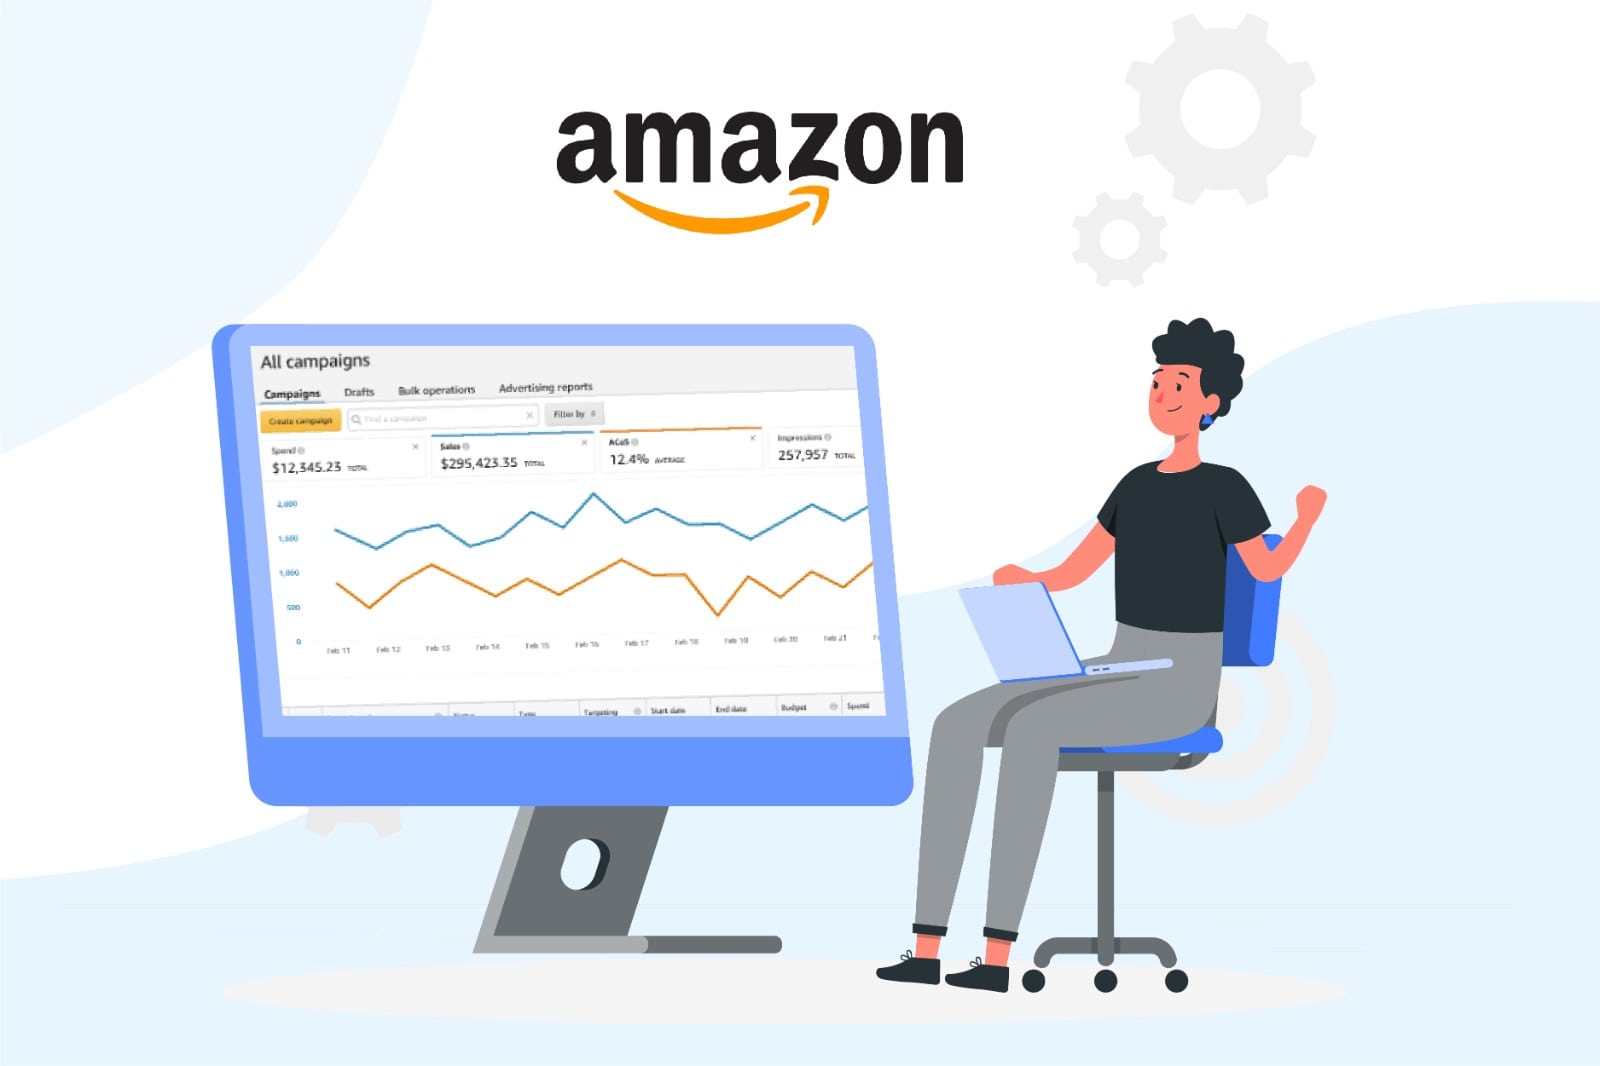 amazon campaigns manual vs automatic targeting